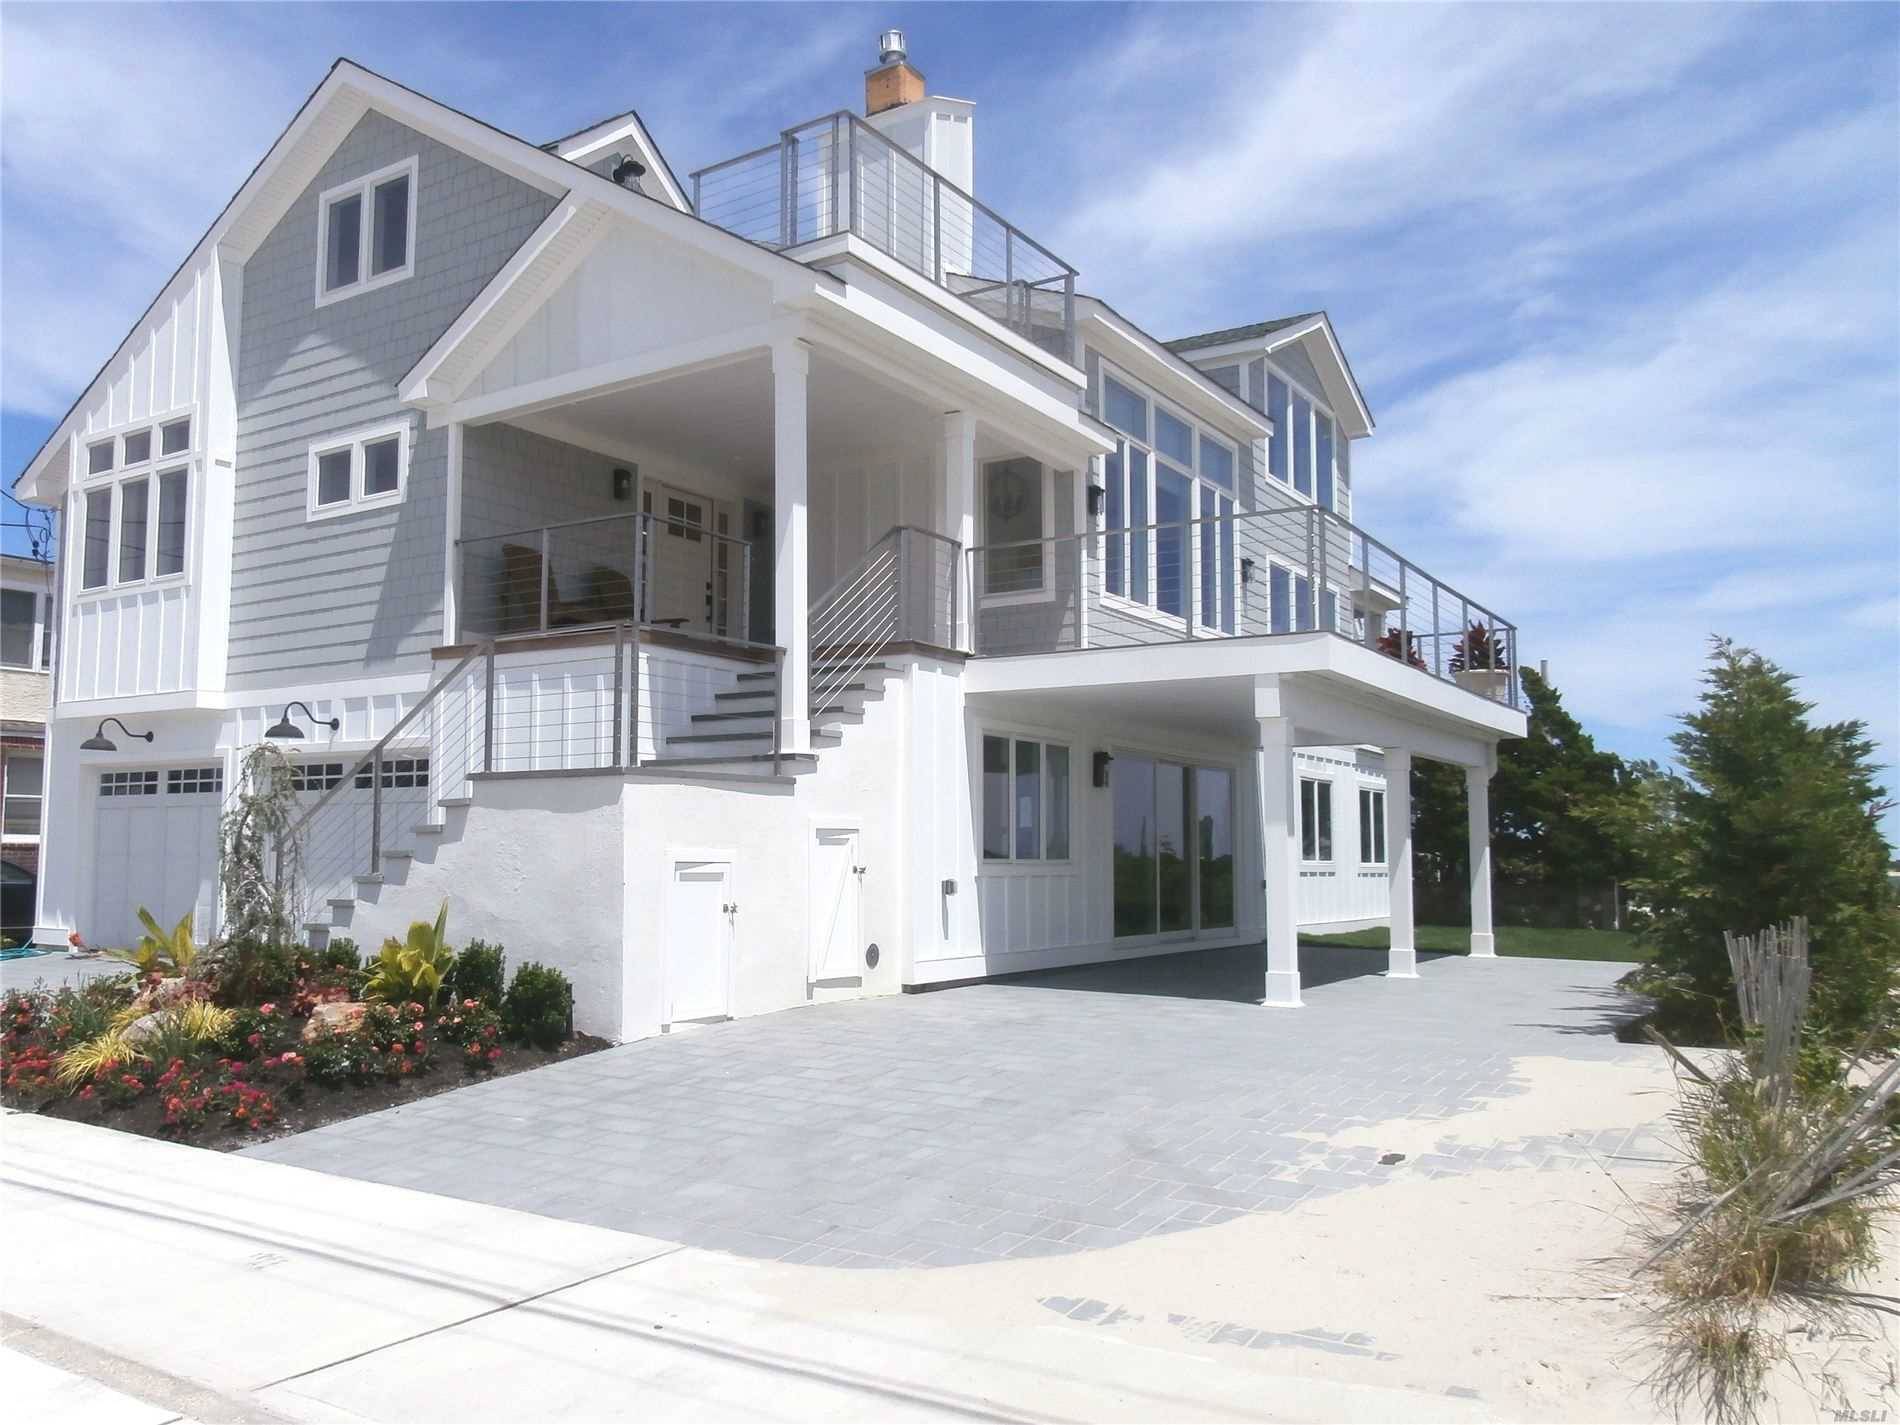 Fantastic Views Throughout this Jones Inlet and Atlantic Ocean Beach Home Estate at the Point of Point Lookout ALL NEW Completely Remodeled Inside Out, 3 Stories, 3 Water View Decks, ...